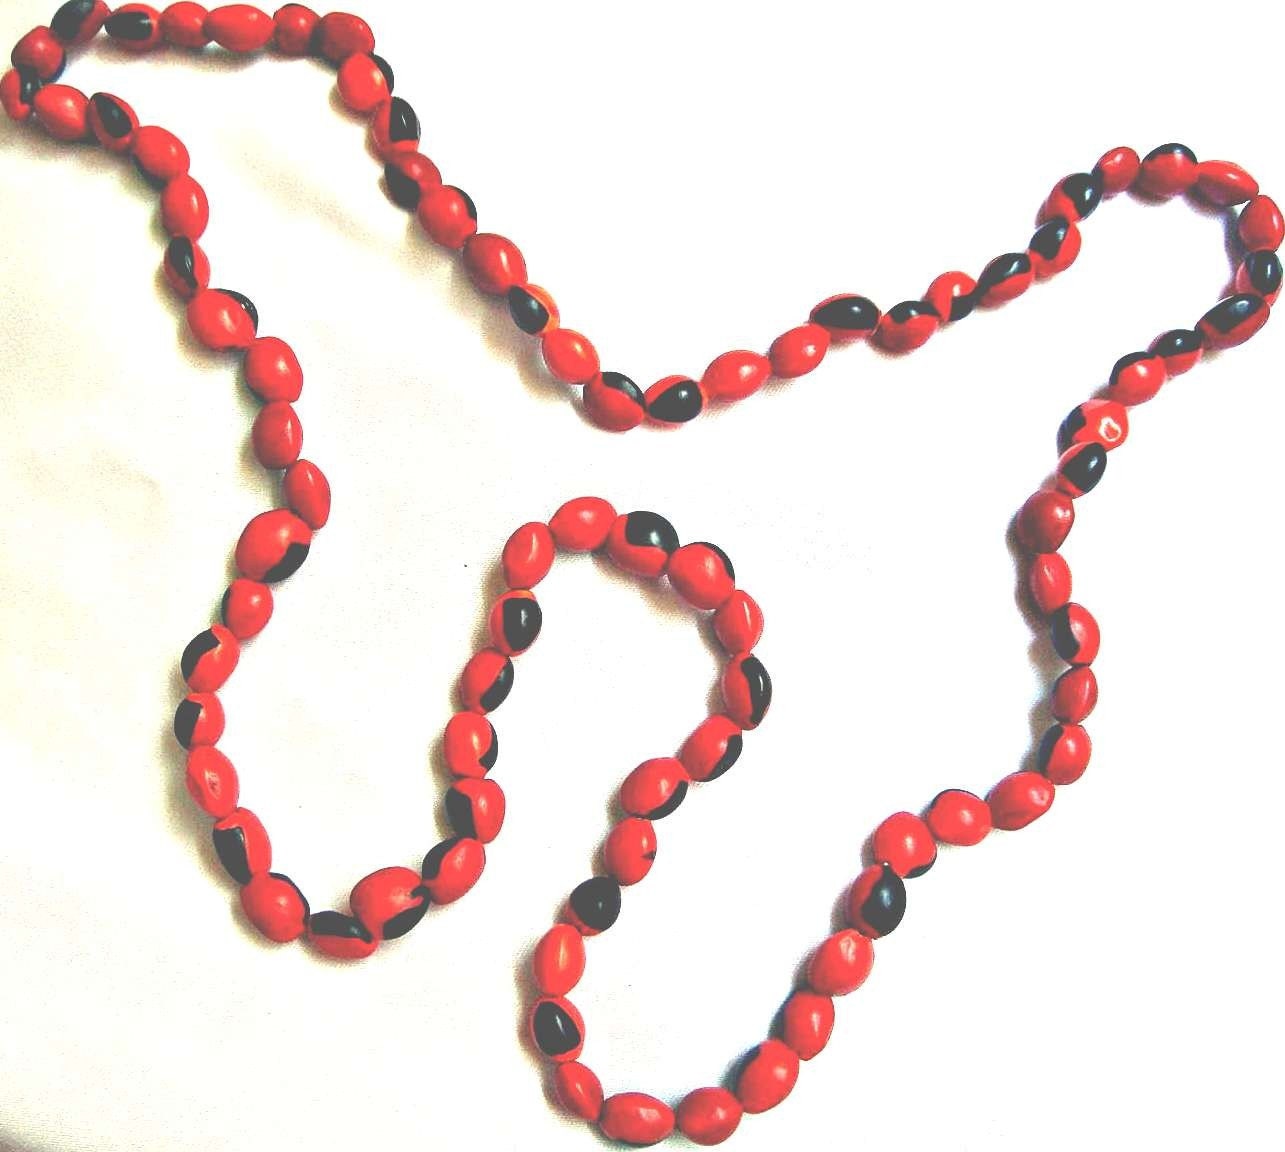 Peruvian Huayruro Necklace -Good Luck- Red and Black Avoid Evil Eye